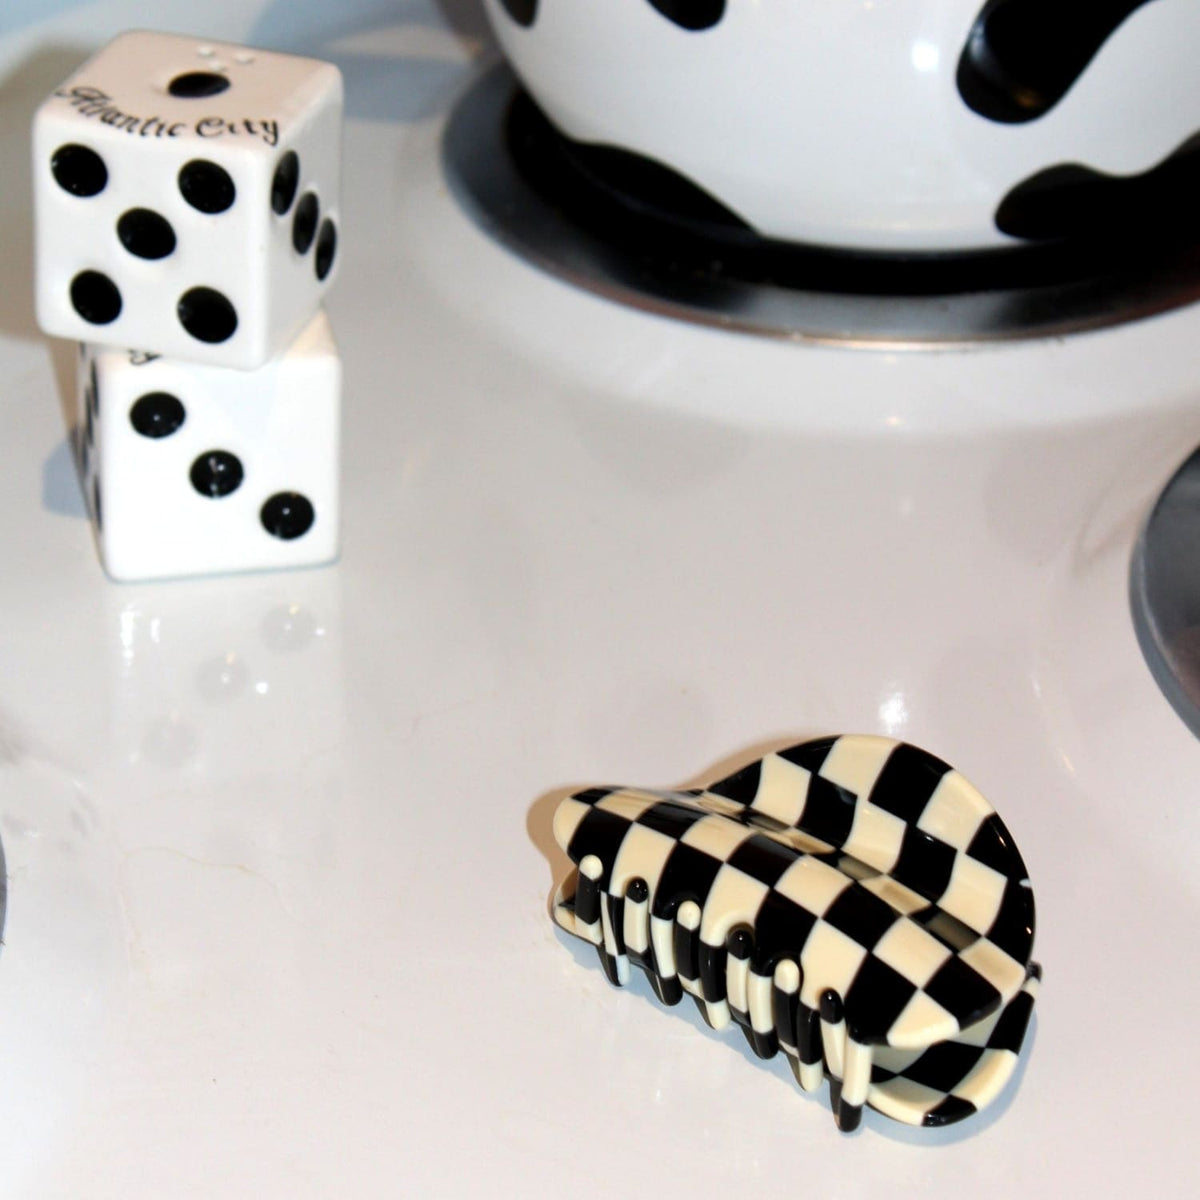 Dice Rings Are Functional Bling For Tabletop Gamers